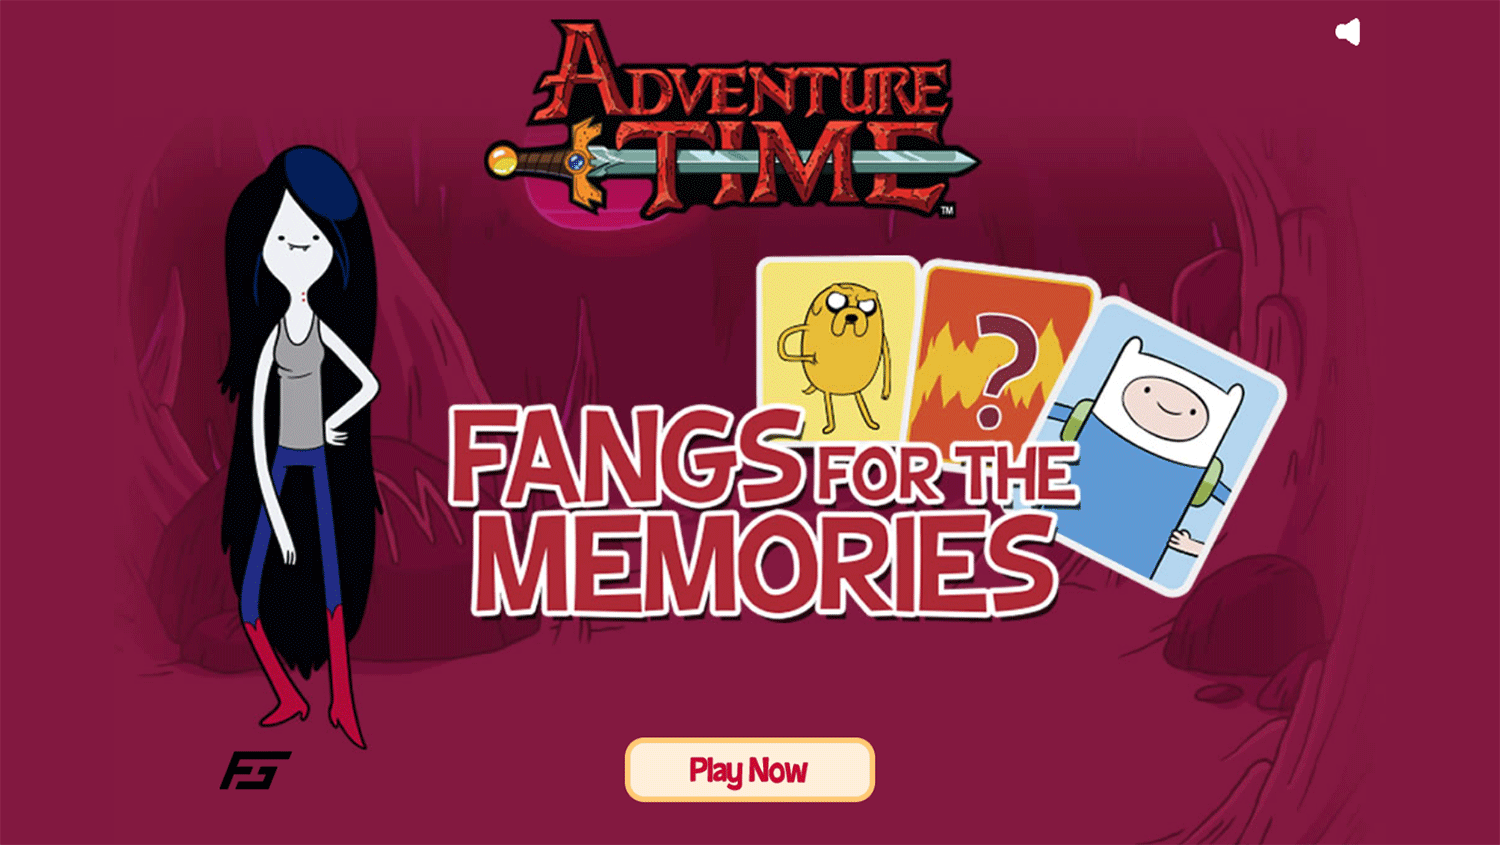 Adventure Time Fangs for the Memories Game Welcome Screen Screenshot.